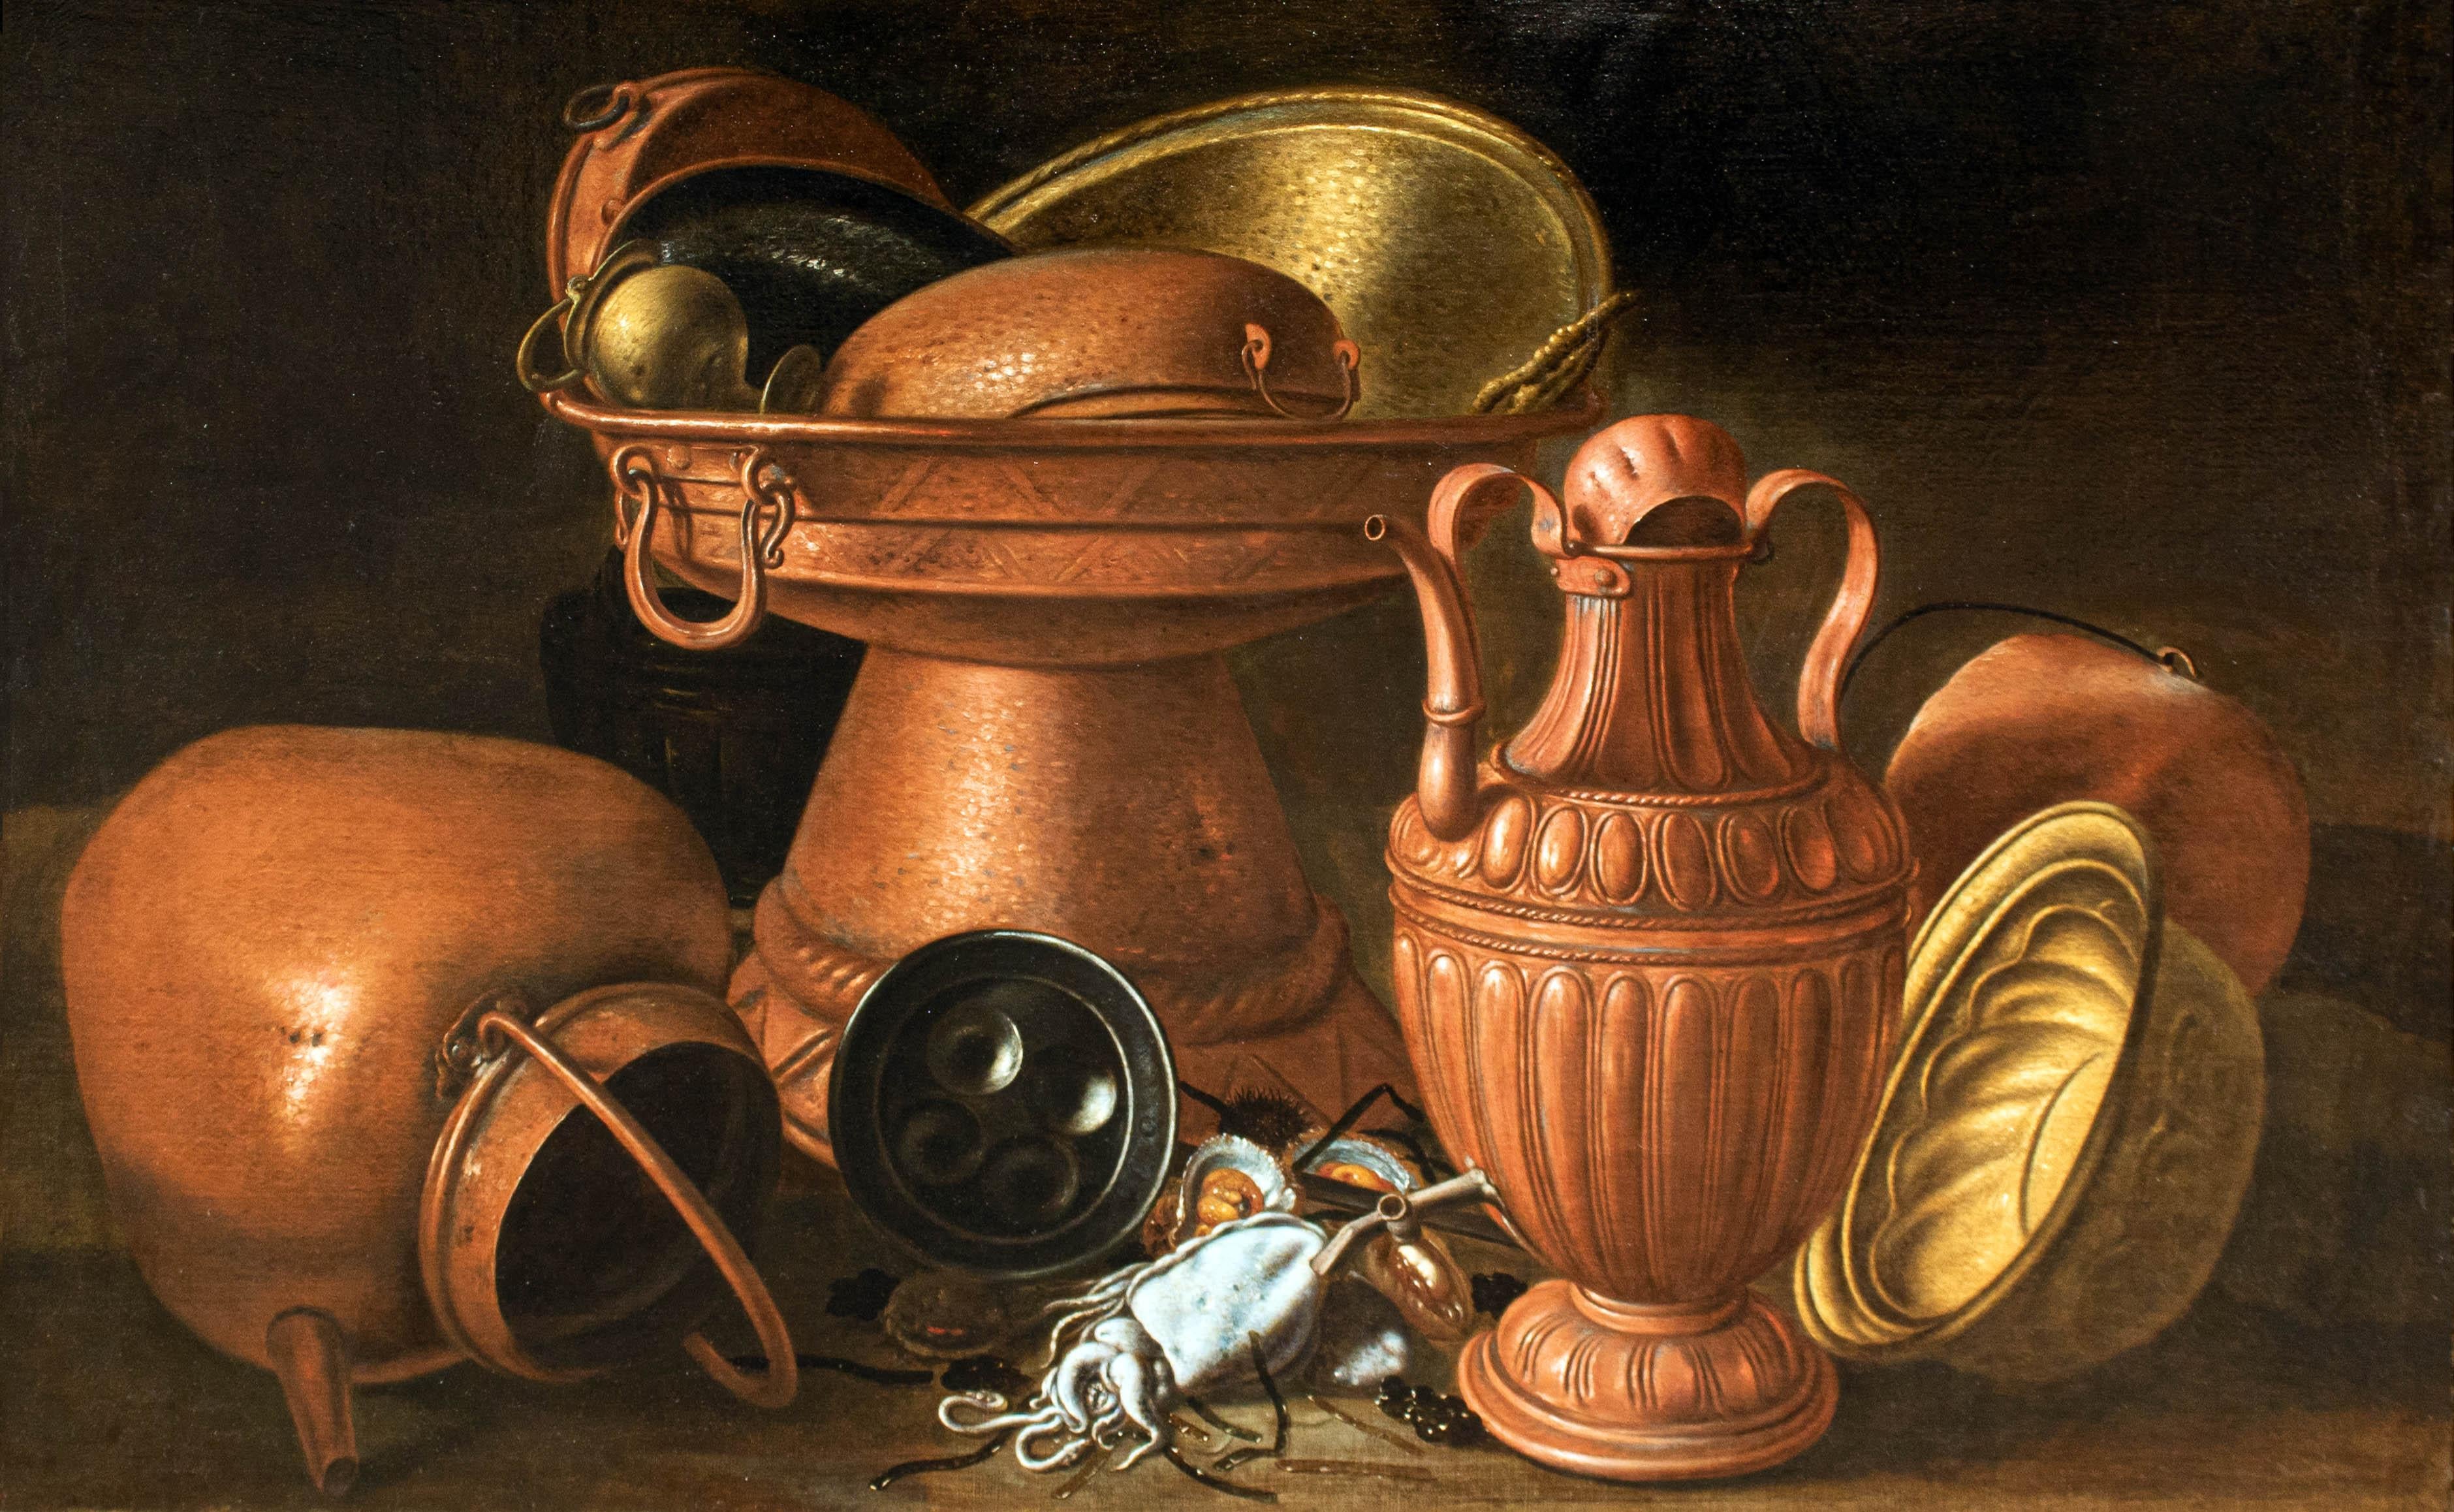 Still Life with Dishes Painting Oil on Canvas Giuseppe Ruoppolo For Sale 1